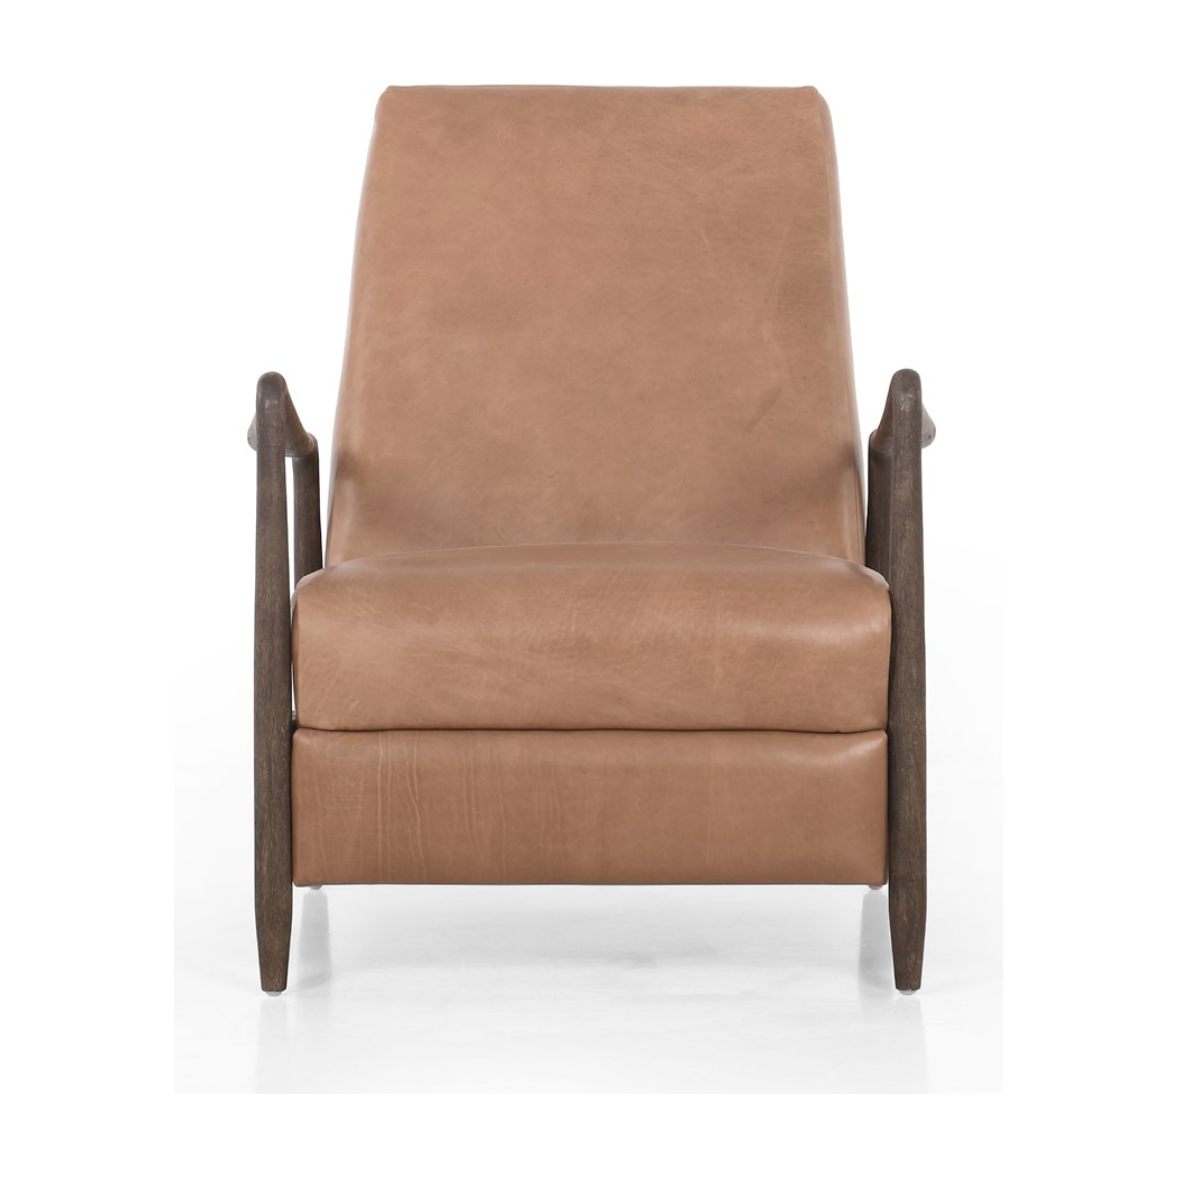 The craftsmanship of the sophisticated Braden Recliner seen here in Dakota Warm Taupe is second to none. With its soft leather and silhouette, this recliner will look great in your main living space or office. Amethyst Home provides interior design services, furniture, rugs and lighting in the Malibu metro area.